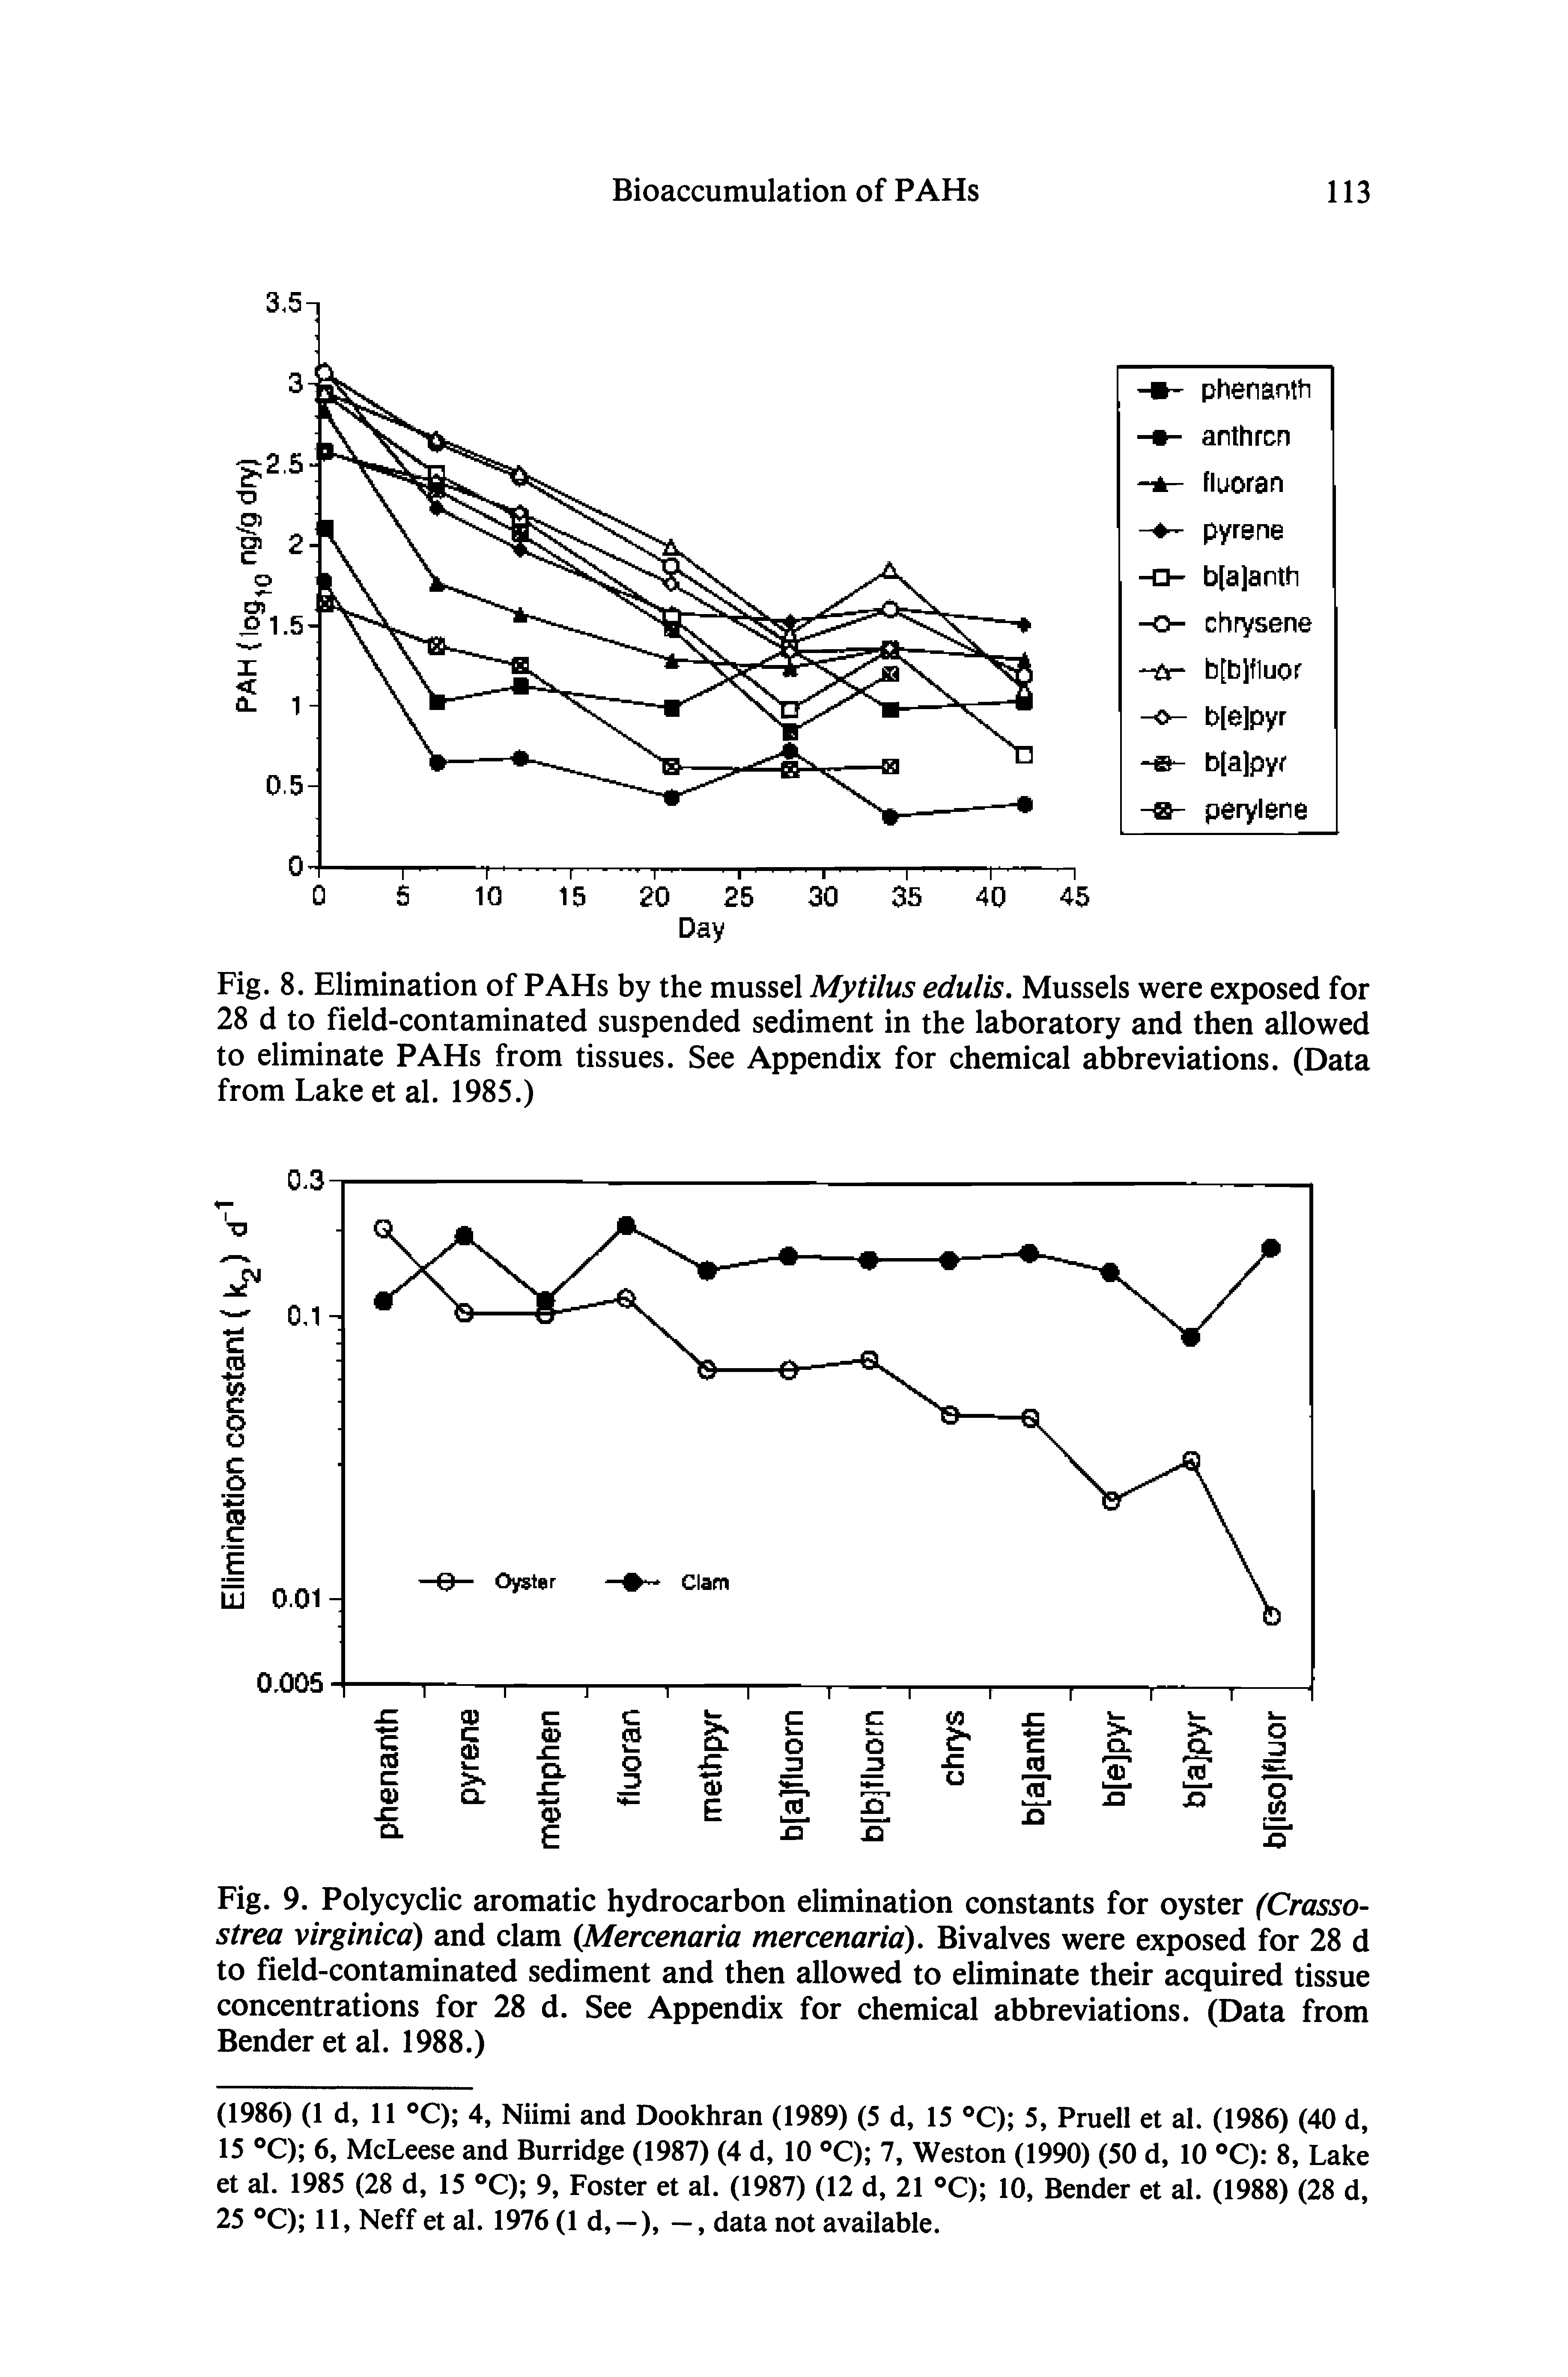 Fig. 9. Polycyclic aromatic hydrocarbon elimination constants for oyster (Crasso-strea virginica) and clam Mercenaria mercenaria). Bivalves were exposed for 28 d to field-contaminated sediment and then allowed to eliminate their acquired tissue concentrations for 28 d. See Appendix for chemical abbreviations. (Data from Bender et al. 1988.)...